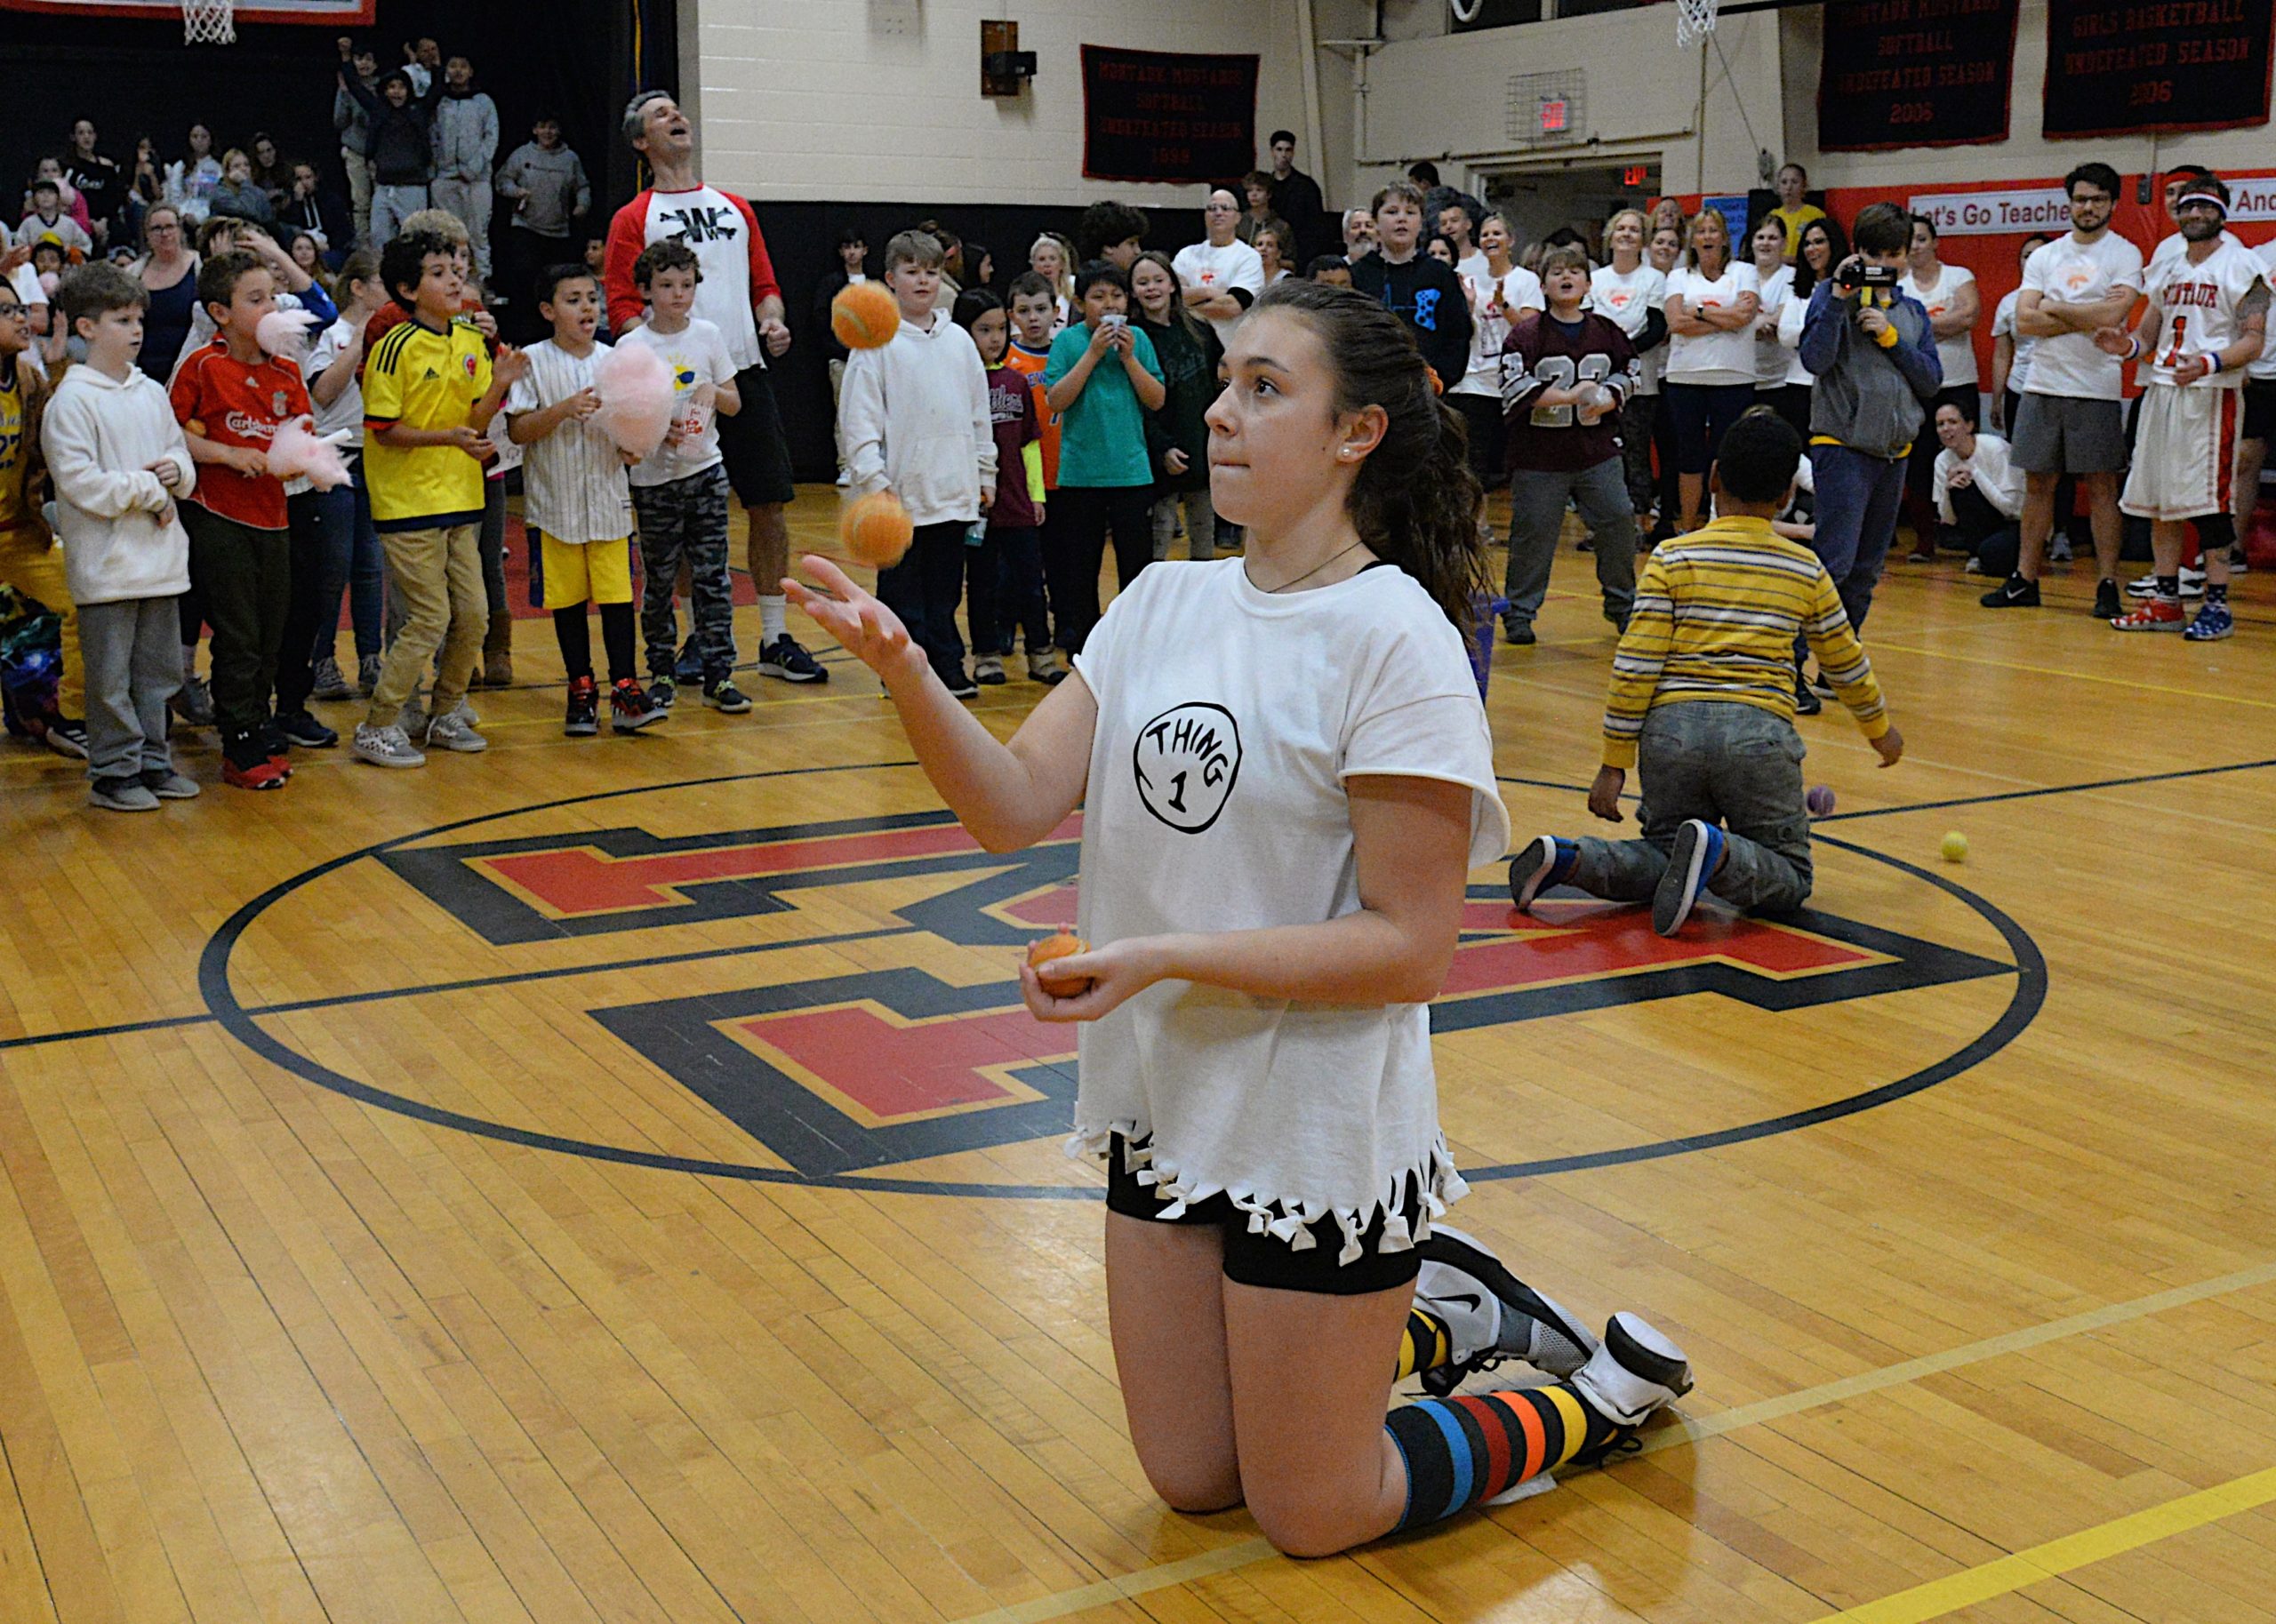 Montauk School held its Sports Night on Friday, during which teachers and eighth grade students competed in a variety of contests before a packed house of cheering students and parents. Katie Kuneth won the juggling event. KYRIL BROMLEY 